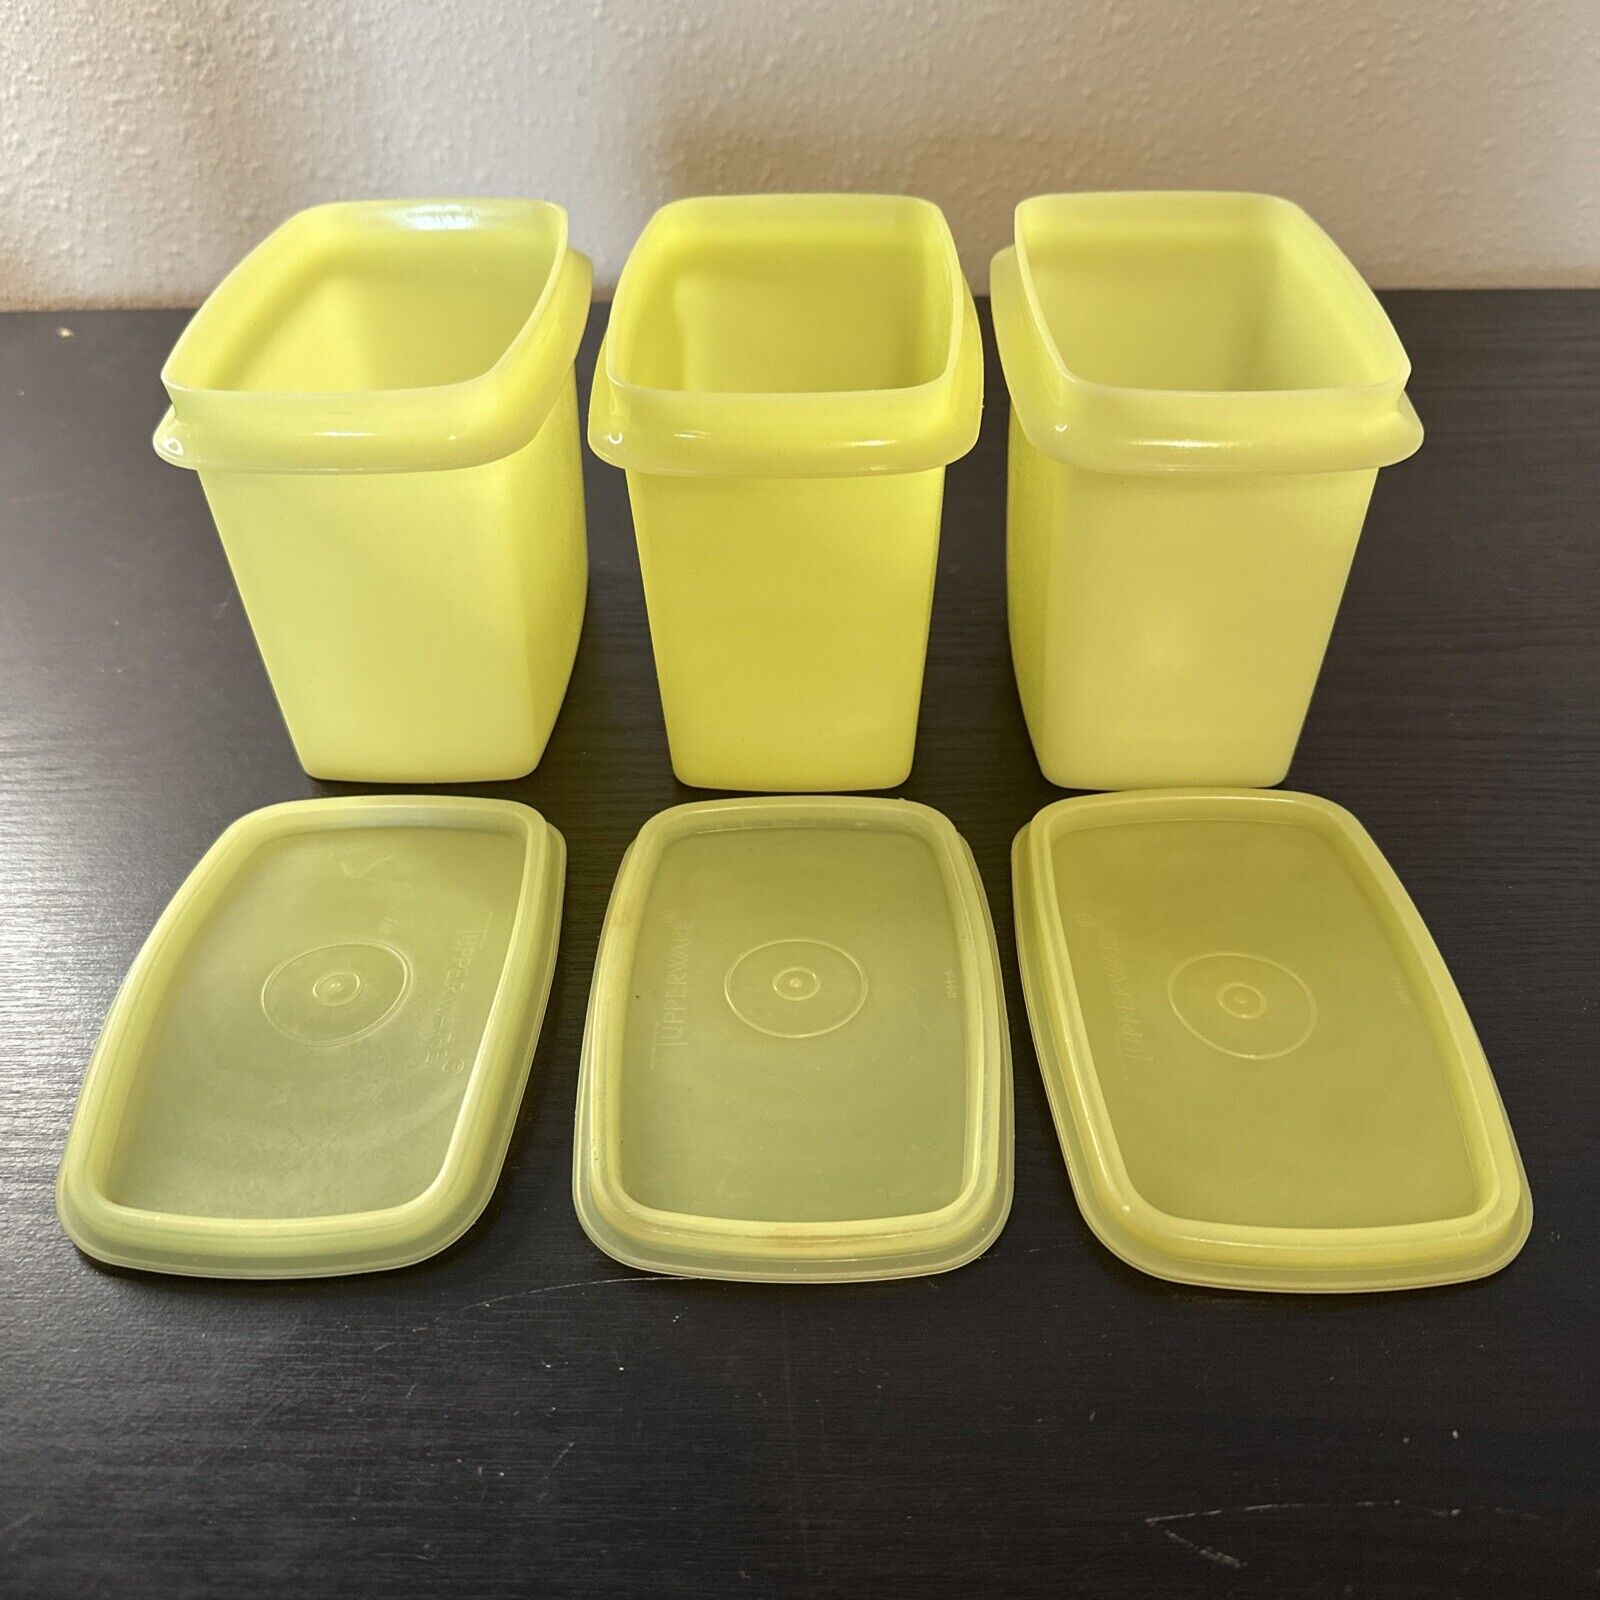 Vtg Tupperware #1243 Yellow Shelf Saver Storage Containers Lot Of 3 With 3 Lids